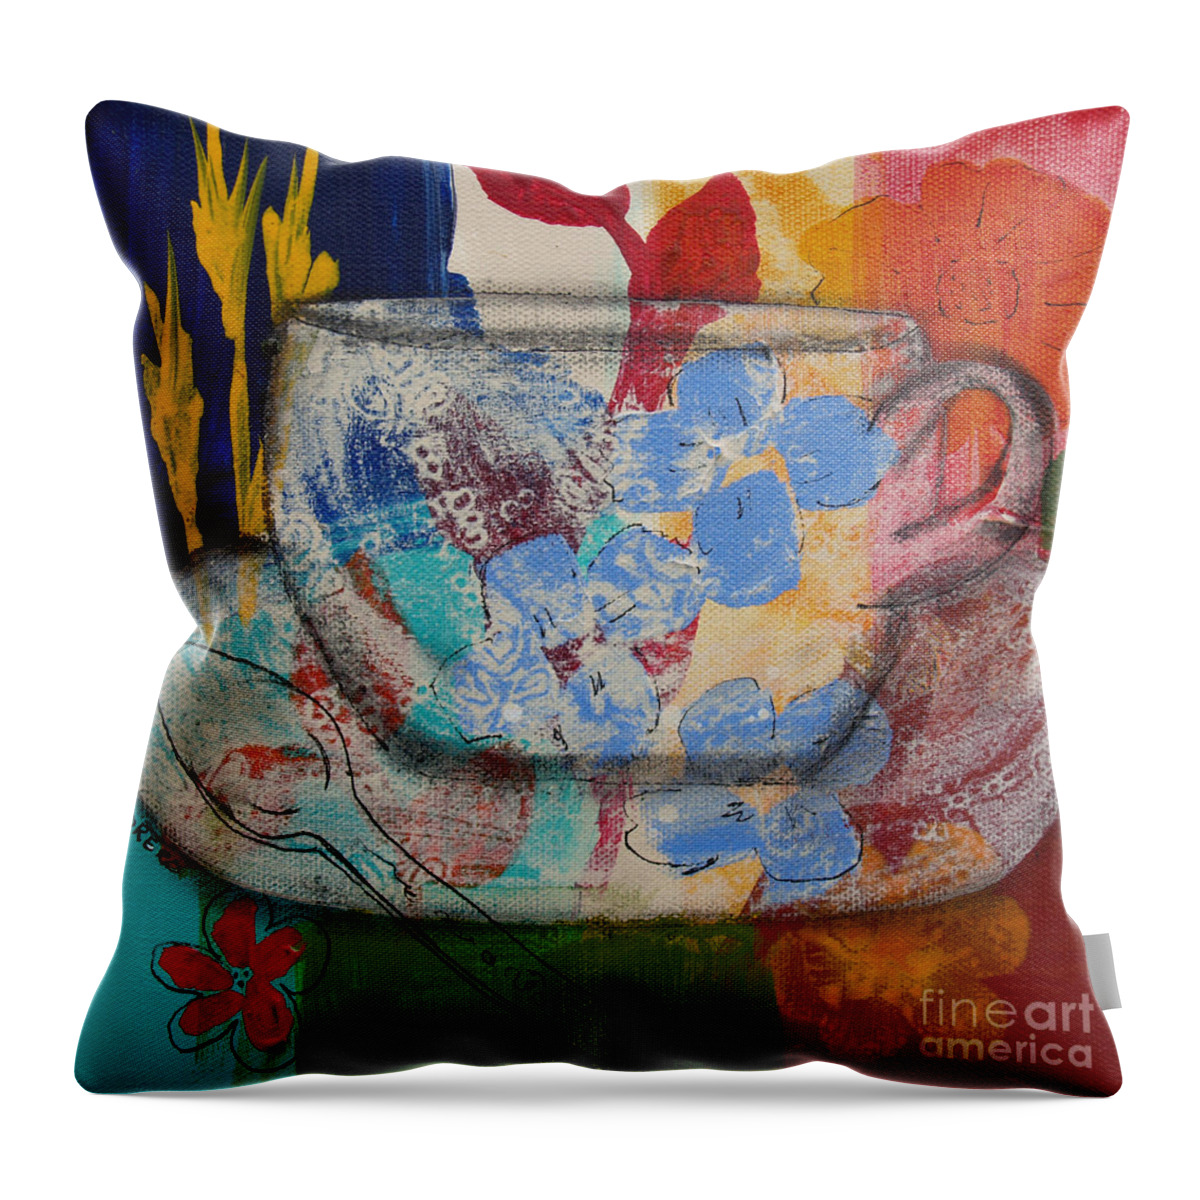 Teacup Throw Pillow featuring the painting Cuppa Luv by Robin Pedrero